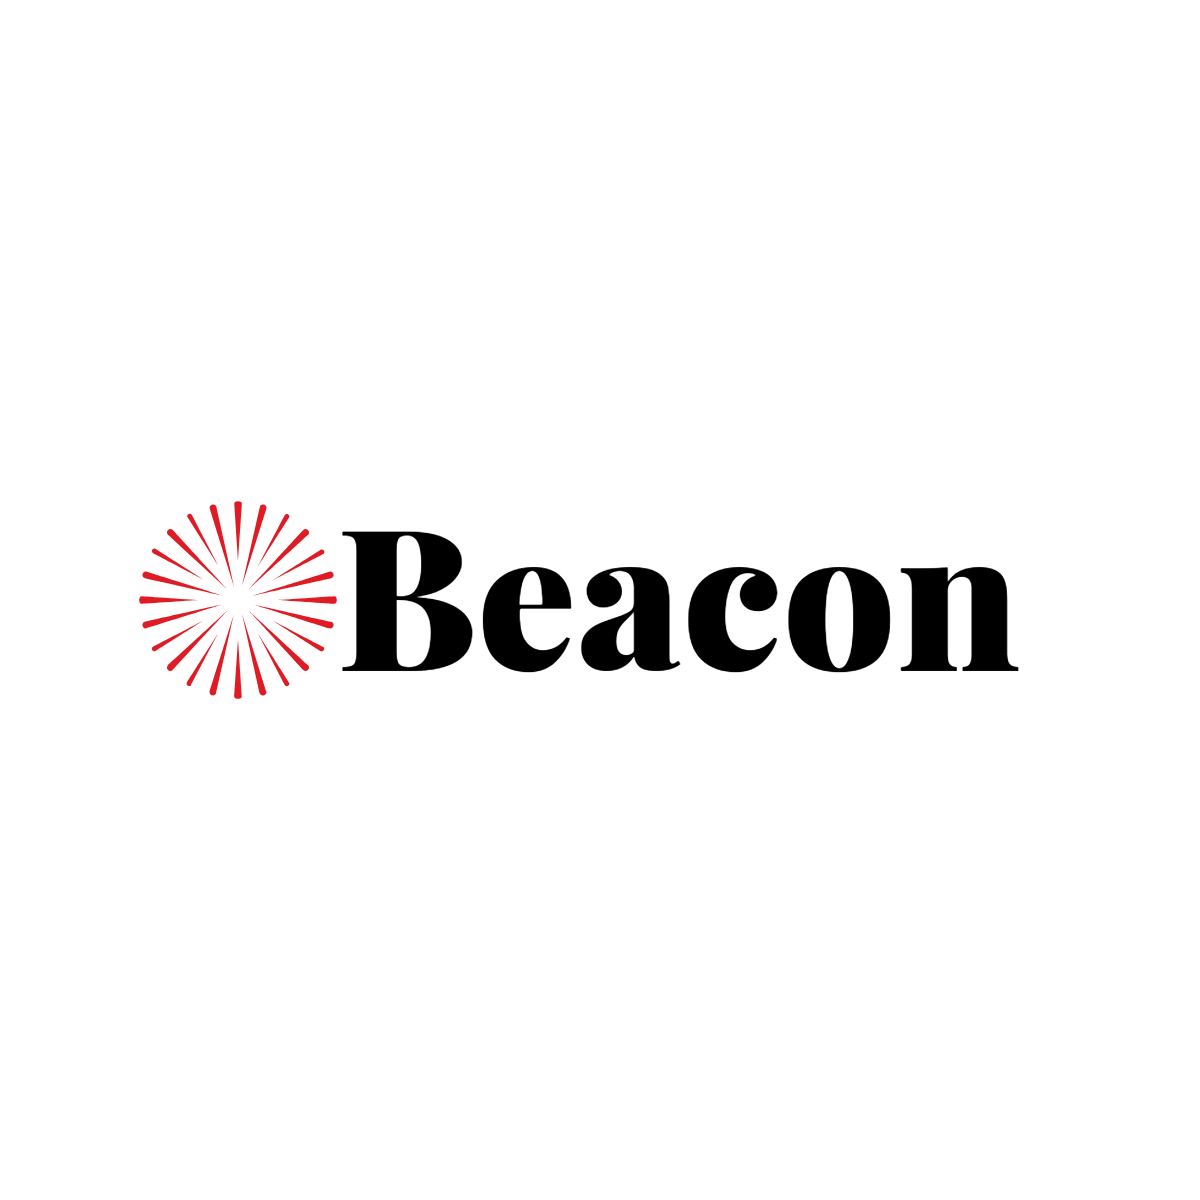 Beacon Co is a leading consulting agency for the home services and trades industries